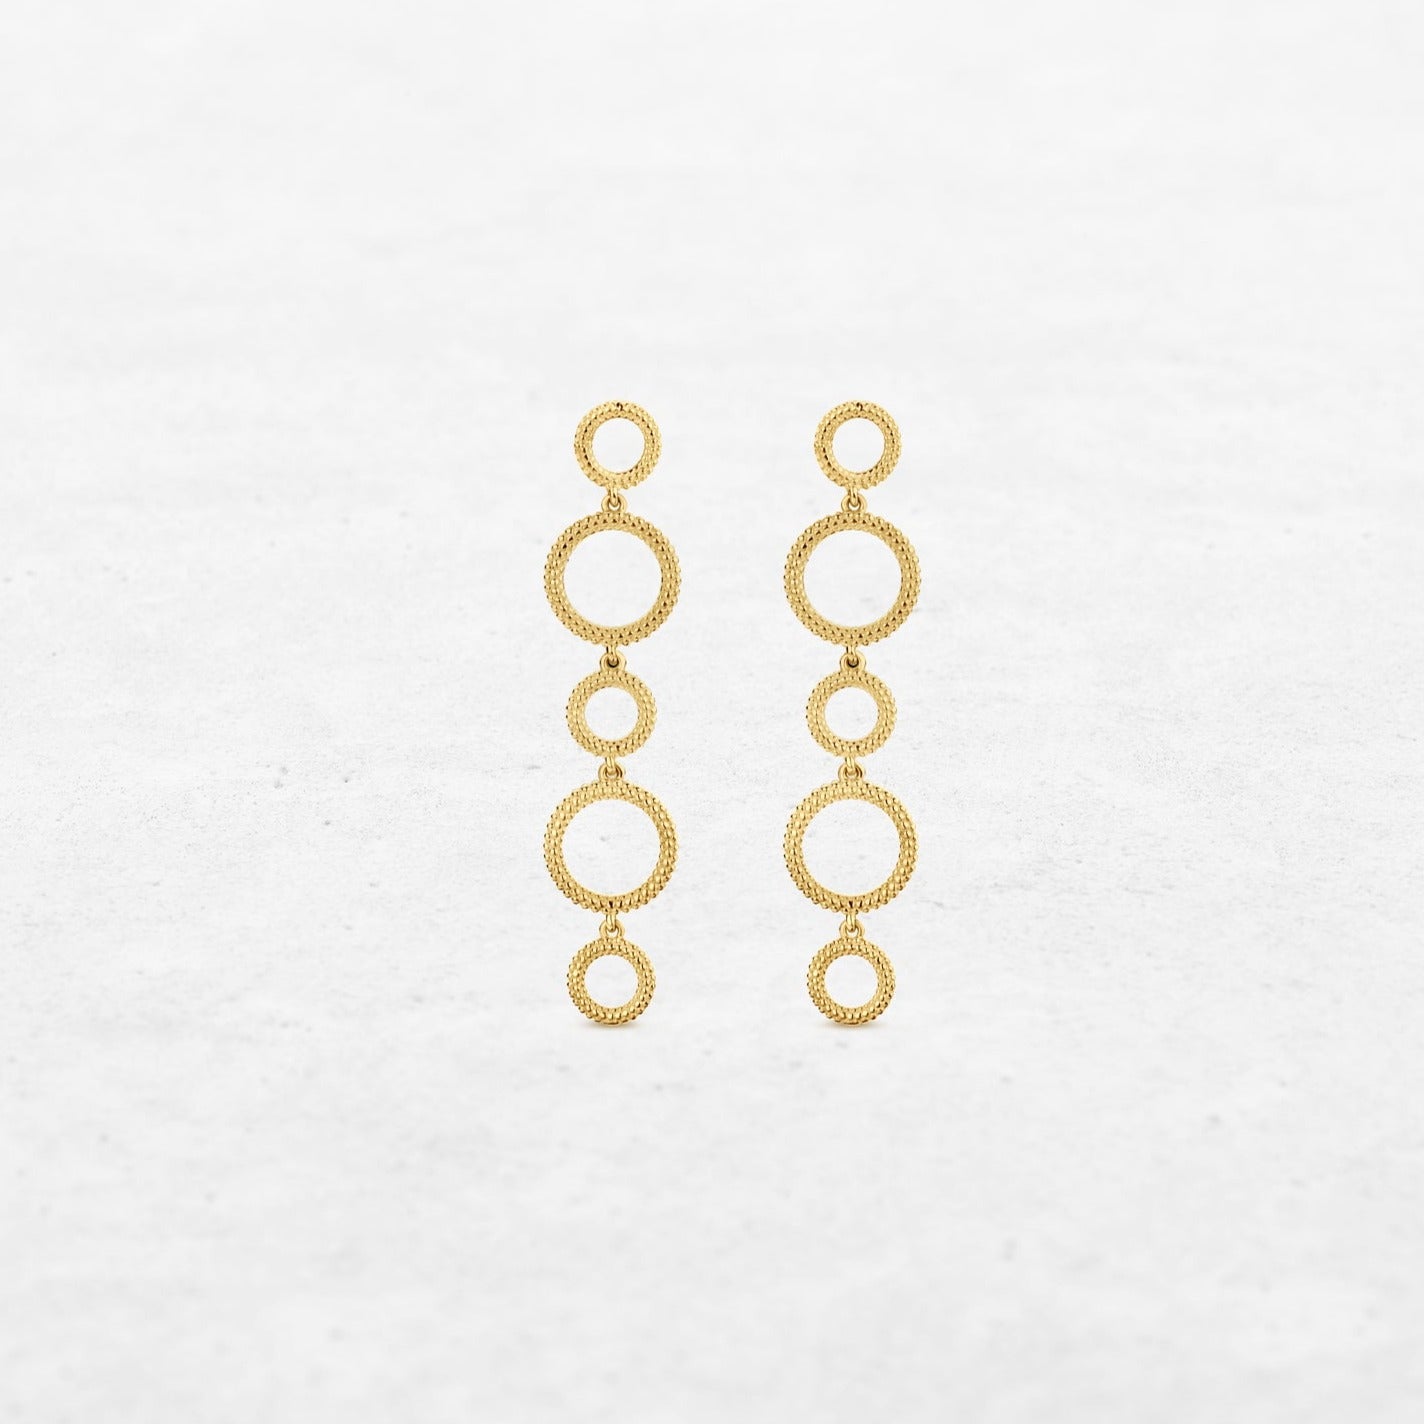 Circular earrings with different sizes in yellow gold made by O! Jewelry